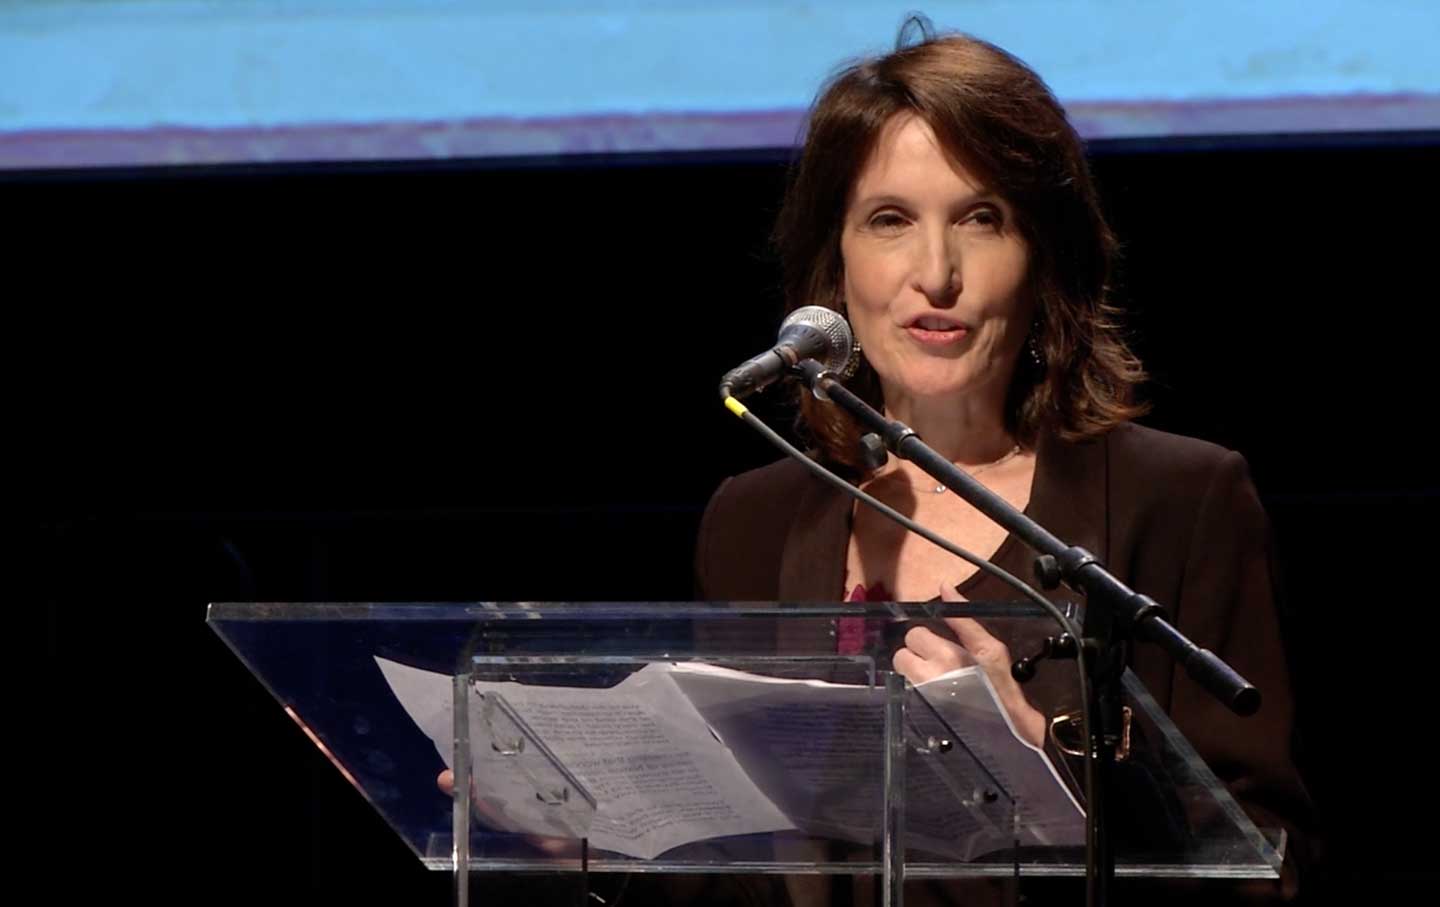 Tony Kushner, Eve Ensler, Bill McKibben, and Calvin Trillin Join Katrina vanden Heuvel for a Stunning Tribute to the 150th Anniversary of ‘The Nation’